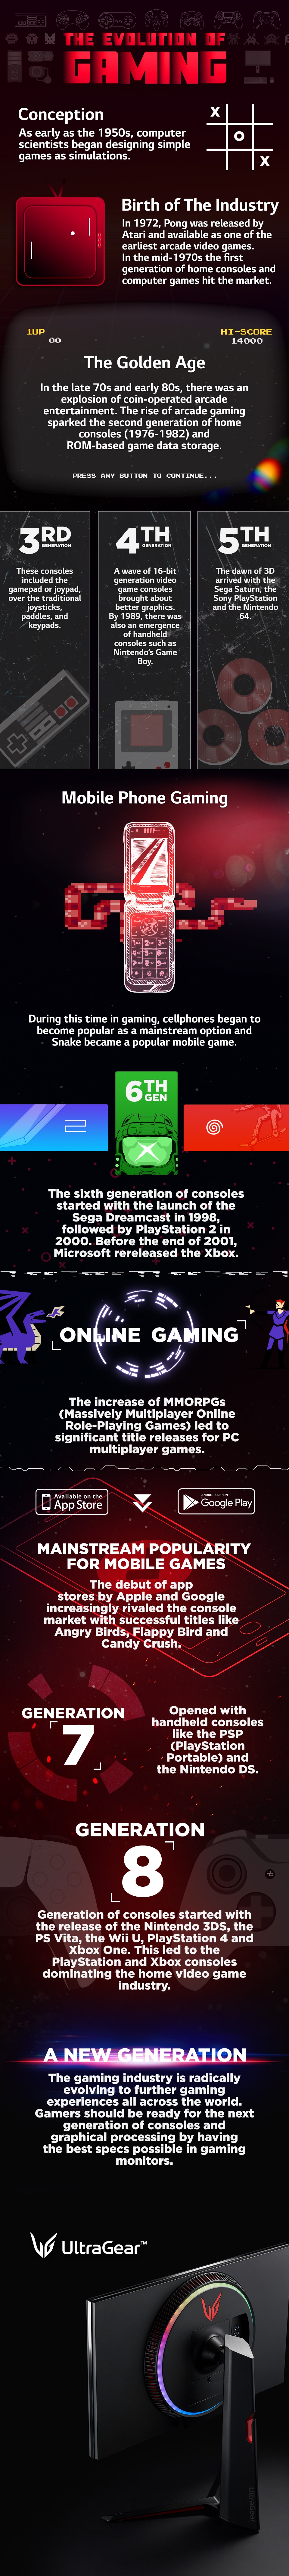 The History of Online Gaming. The history of online gaming dates